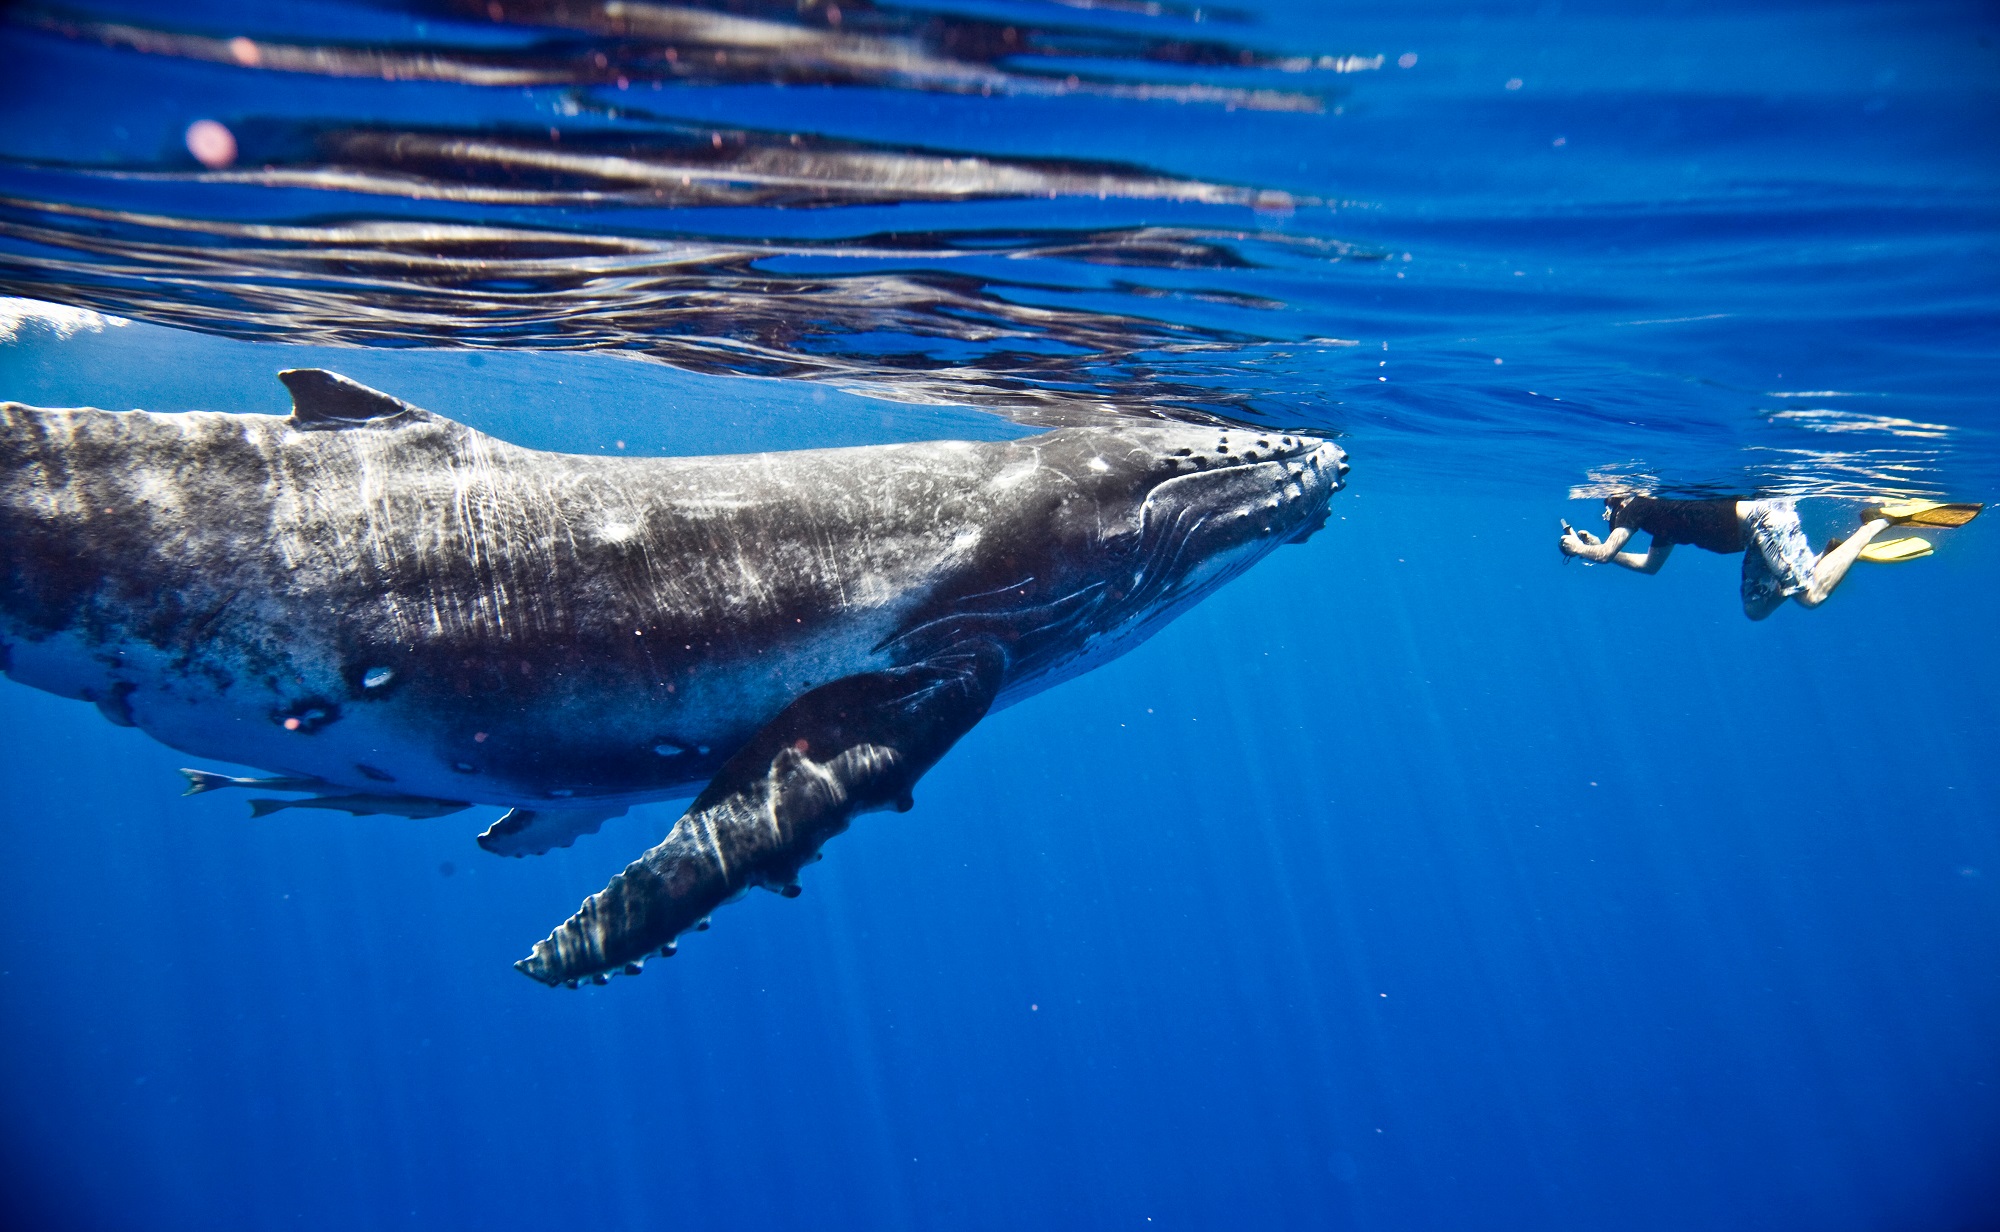 A giant humpback whale facing a snorkeler beneath the surface, one of many creatures to see when scuba diving the Galapagos